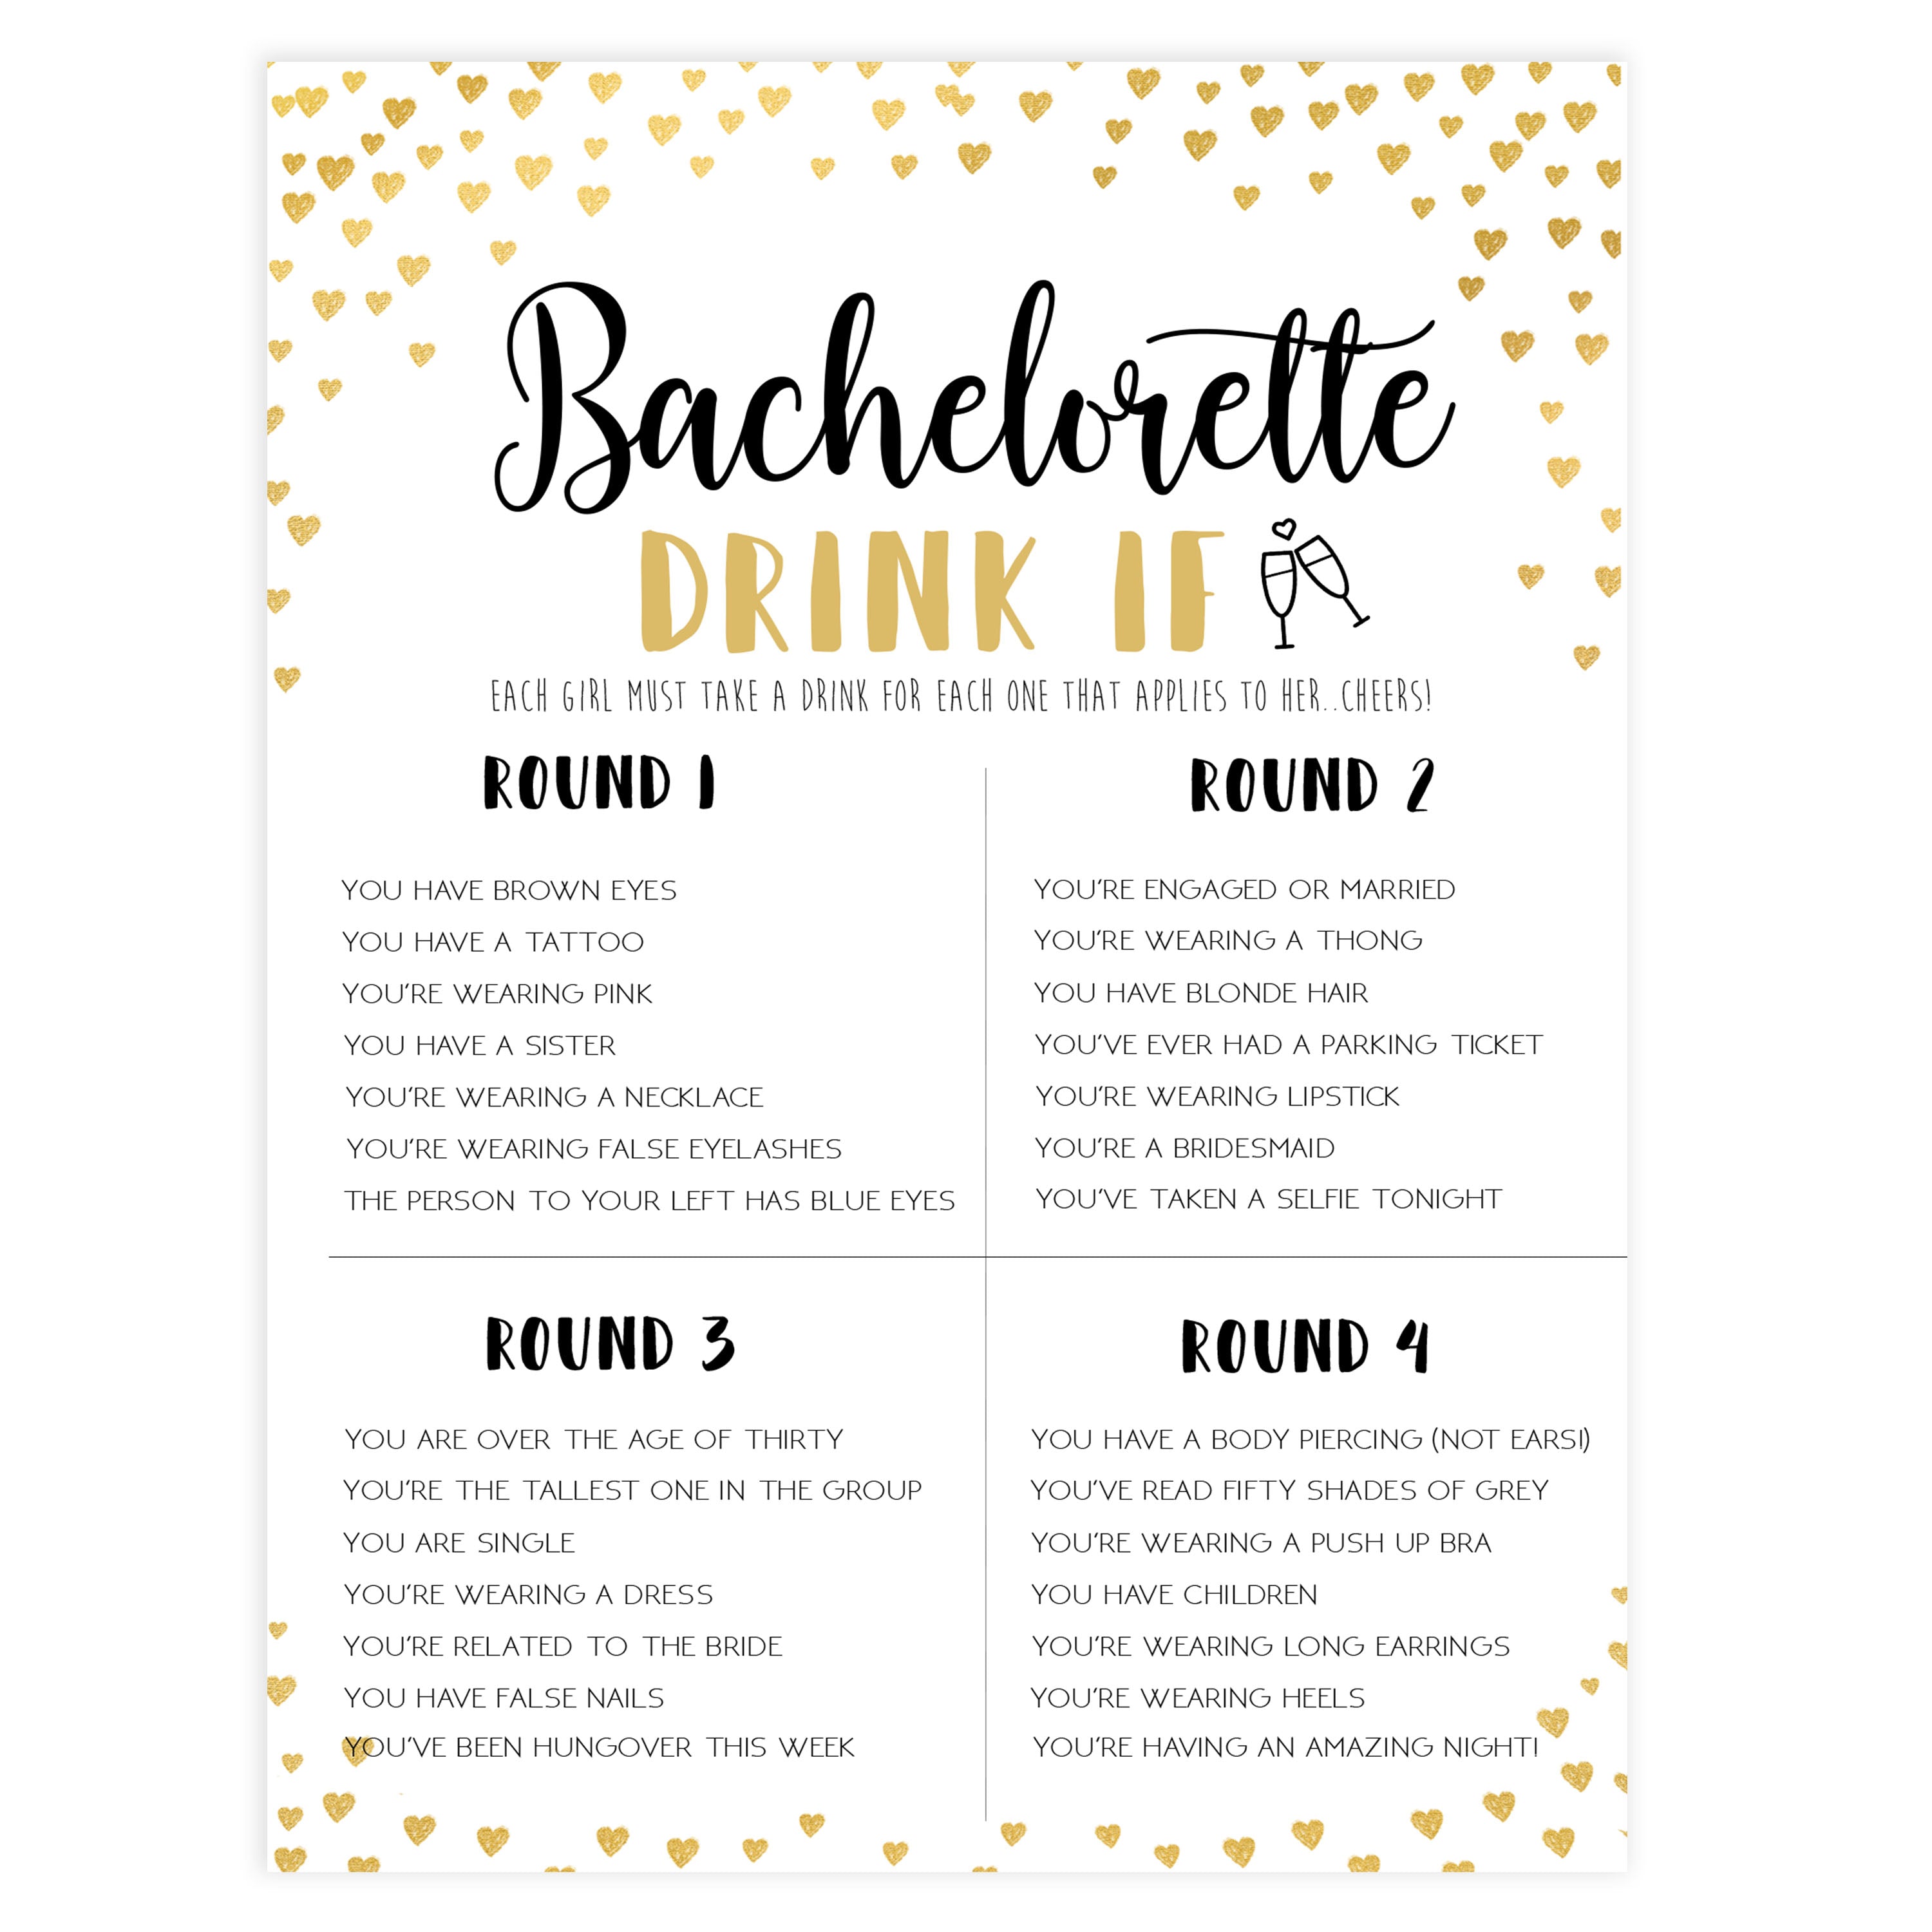 Gold hearts bachelorette games, bachelorette drink if game, printable bachelorette games, hen party games, top party games, fun bridal shower games, bachelorette party games